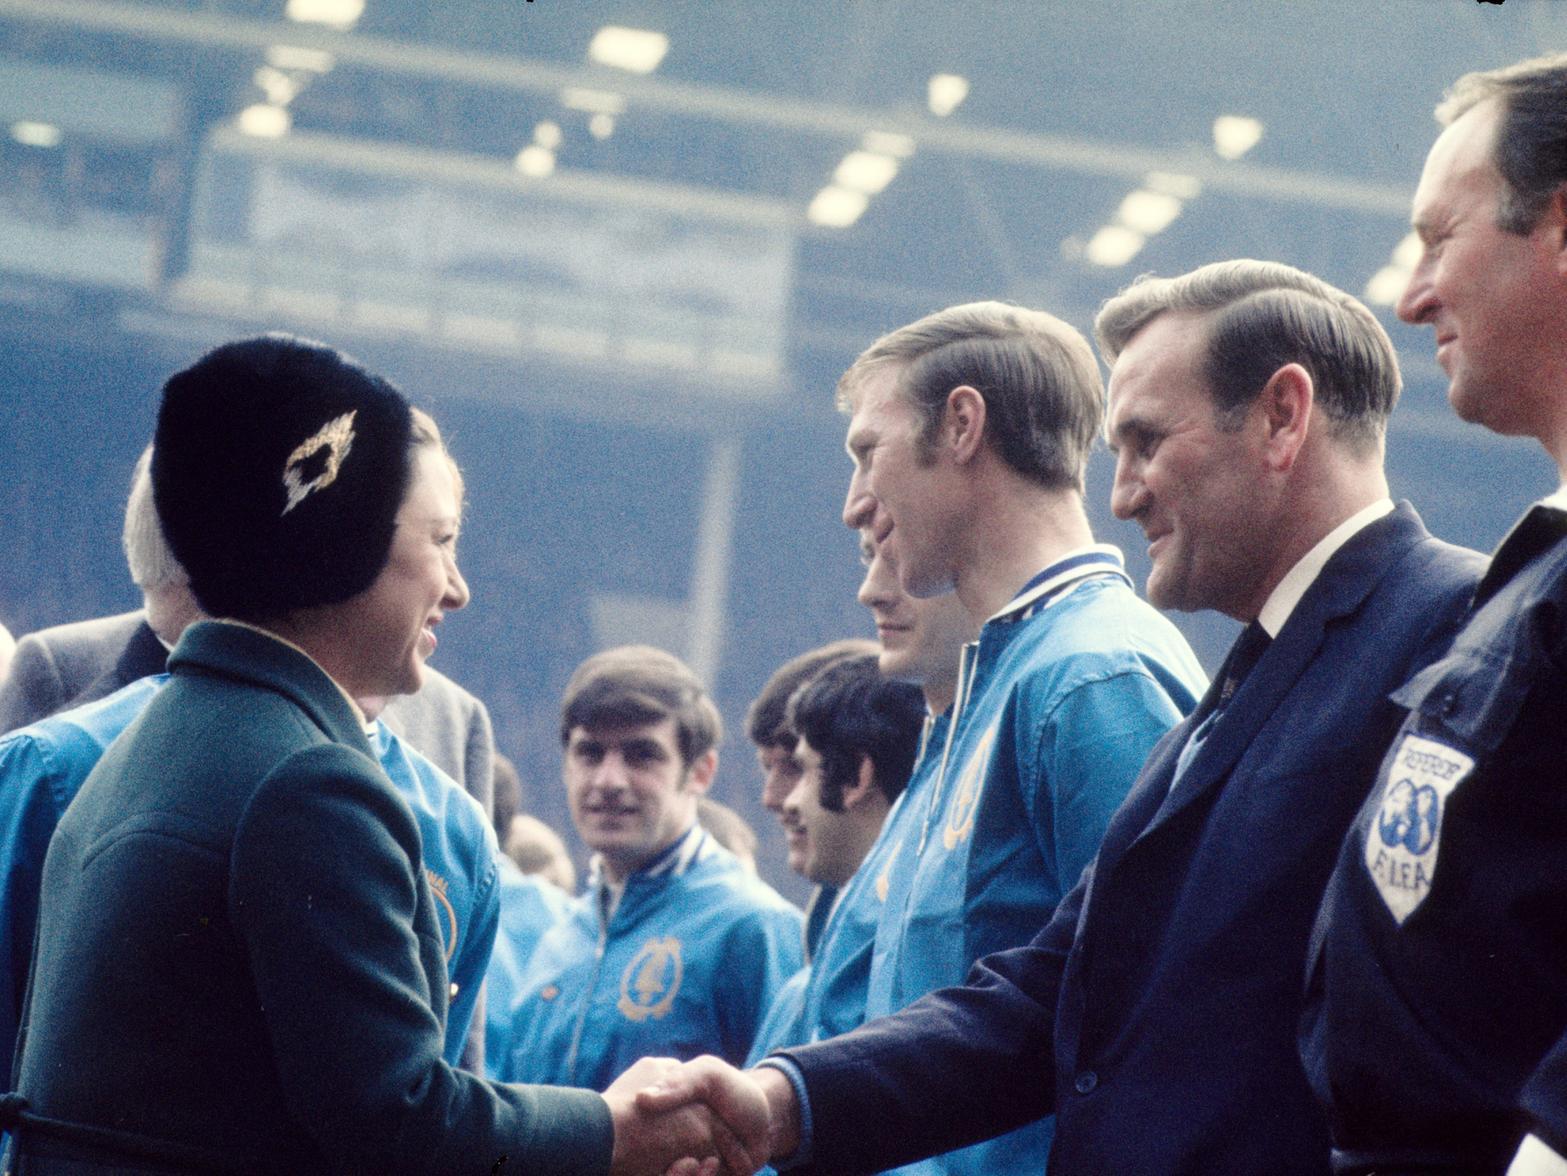 Don Revie is introduced to the royal party ahead of the 1970 FA Cup final.